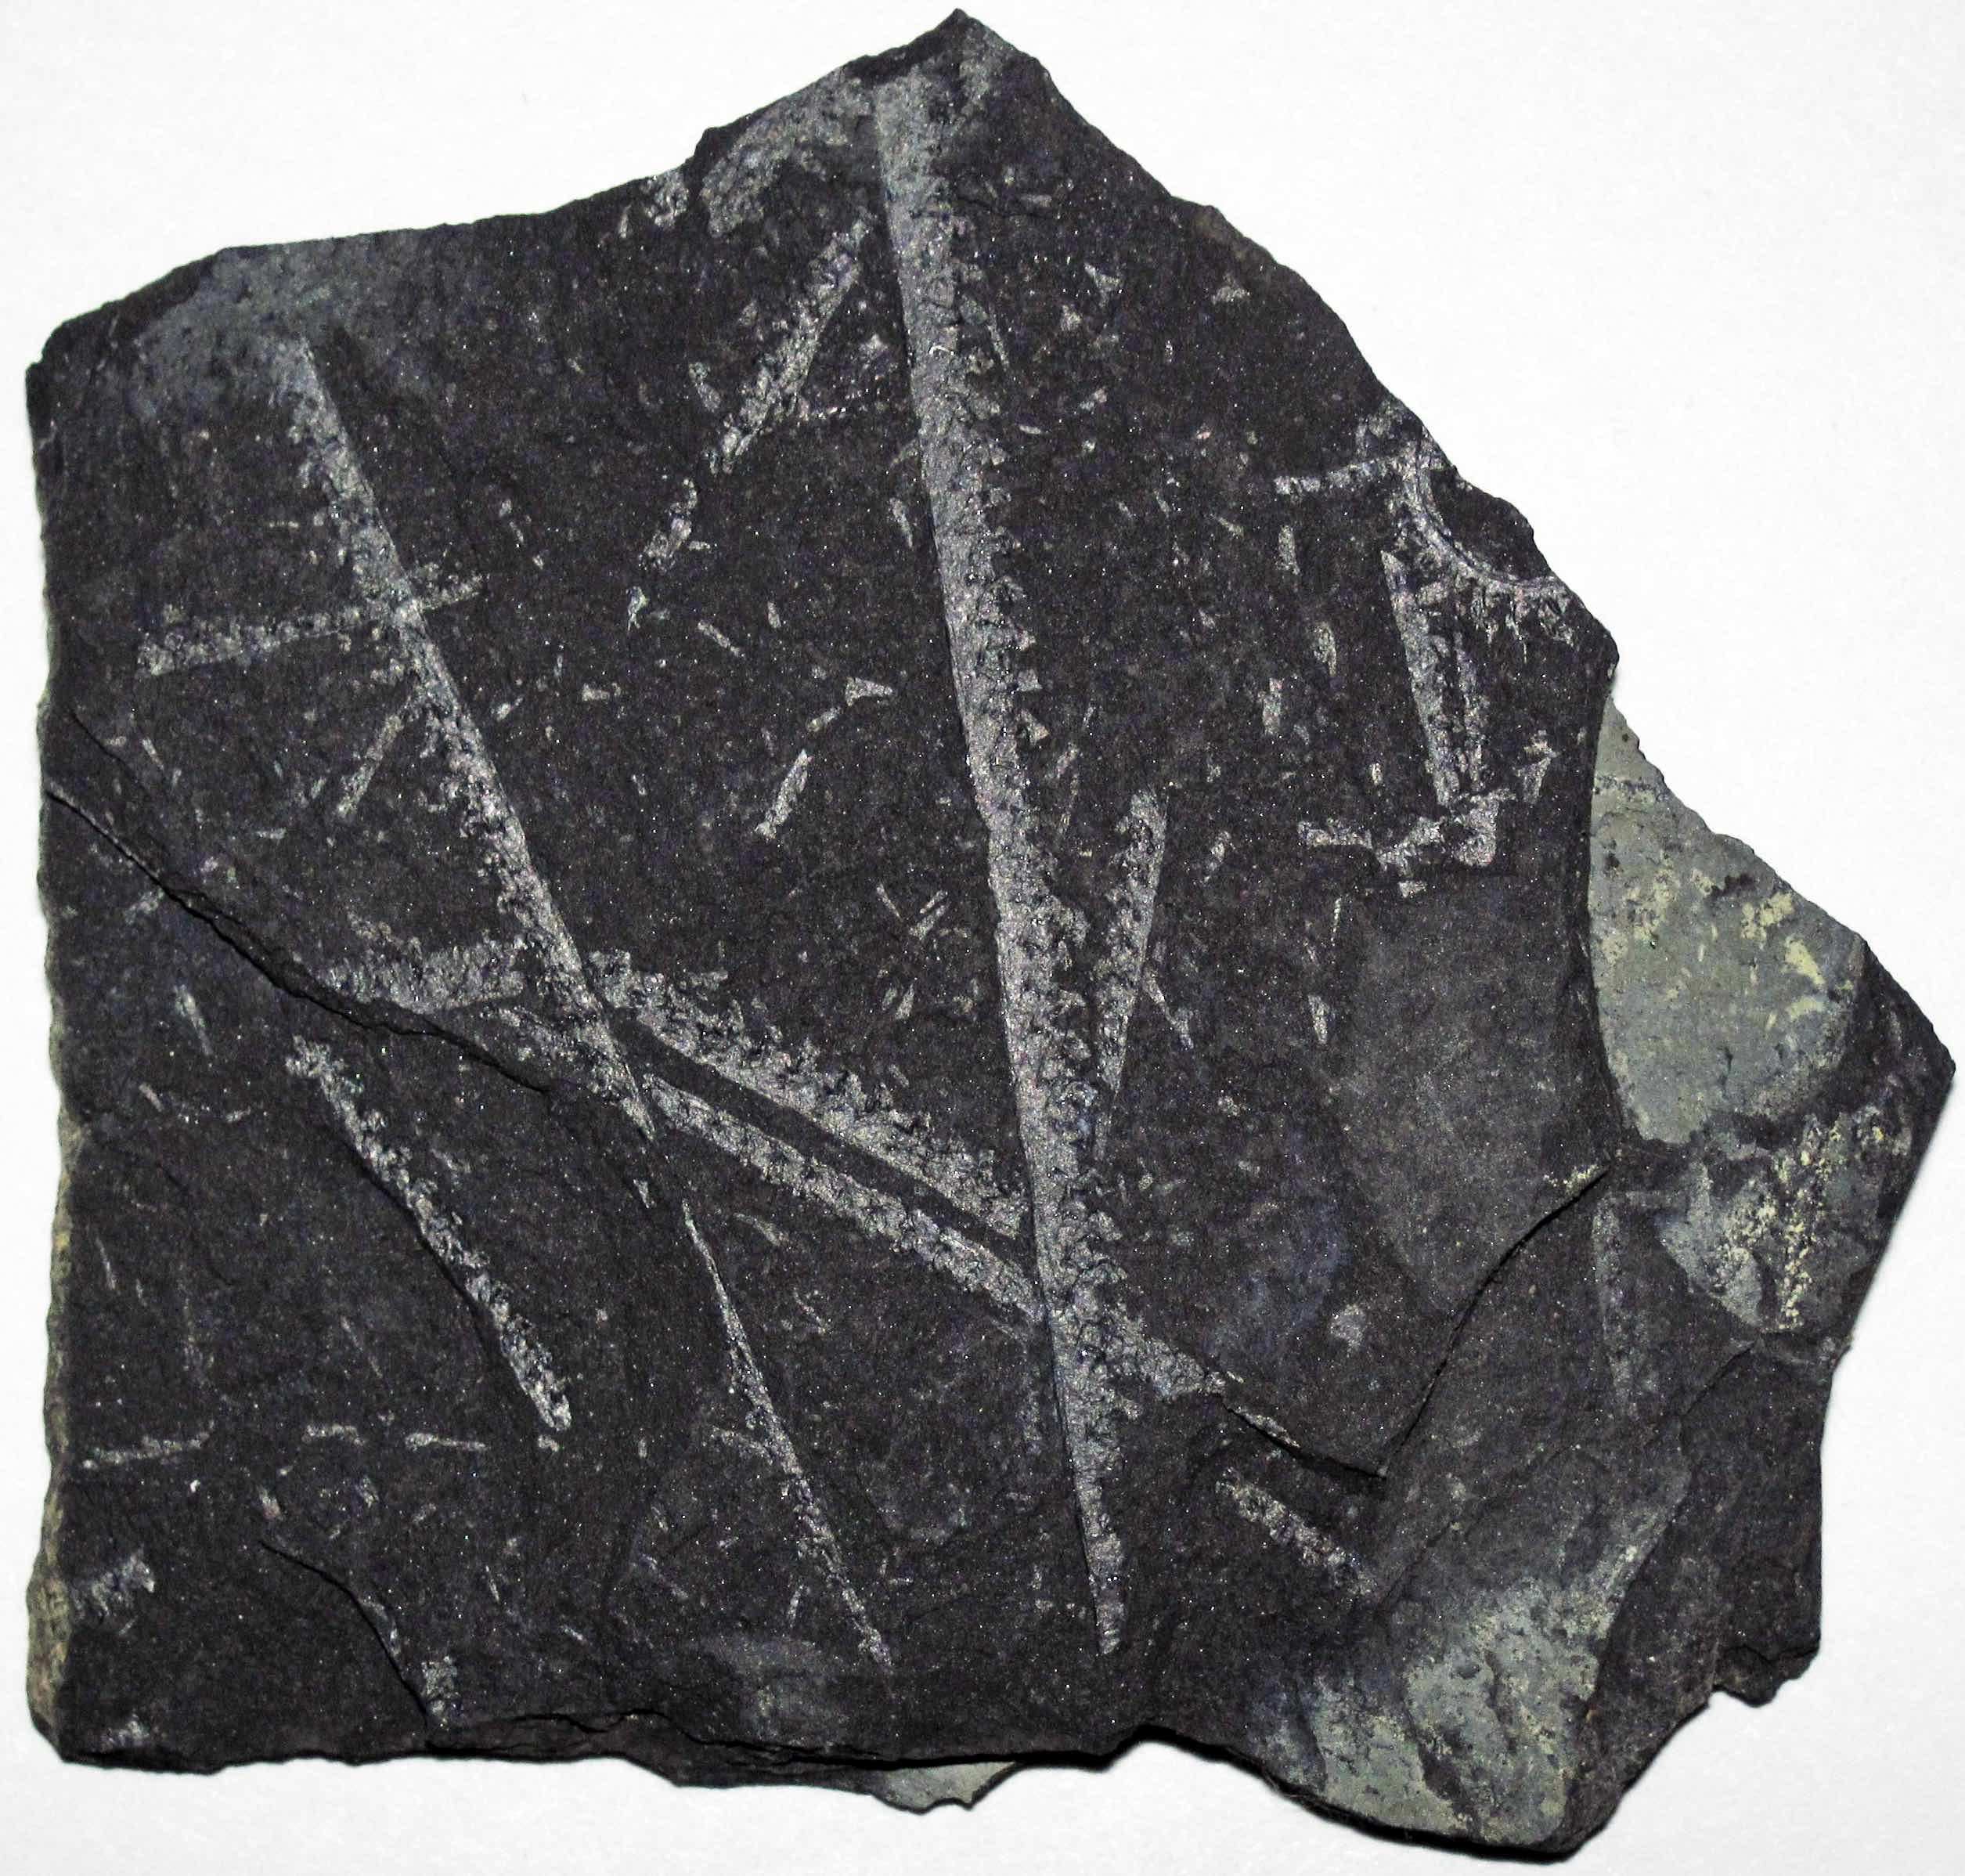 Carbonization of Silurian-aged graptolites from Poland